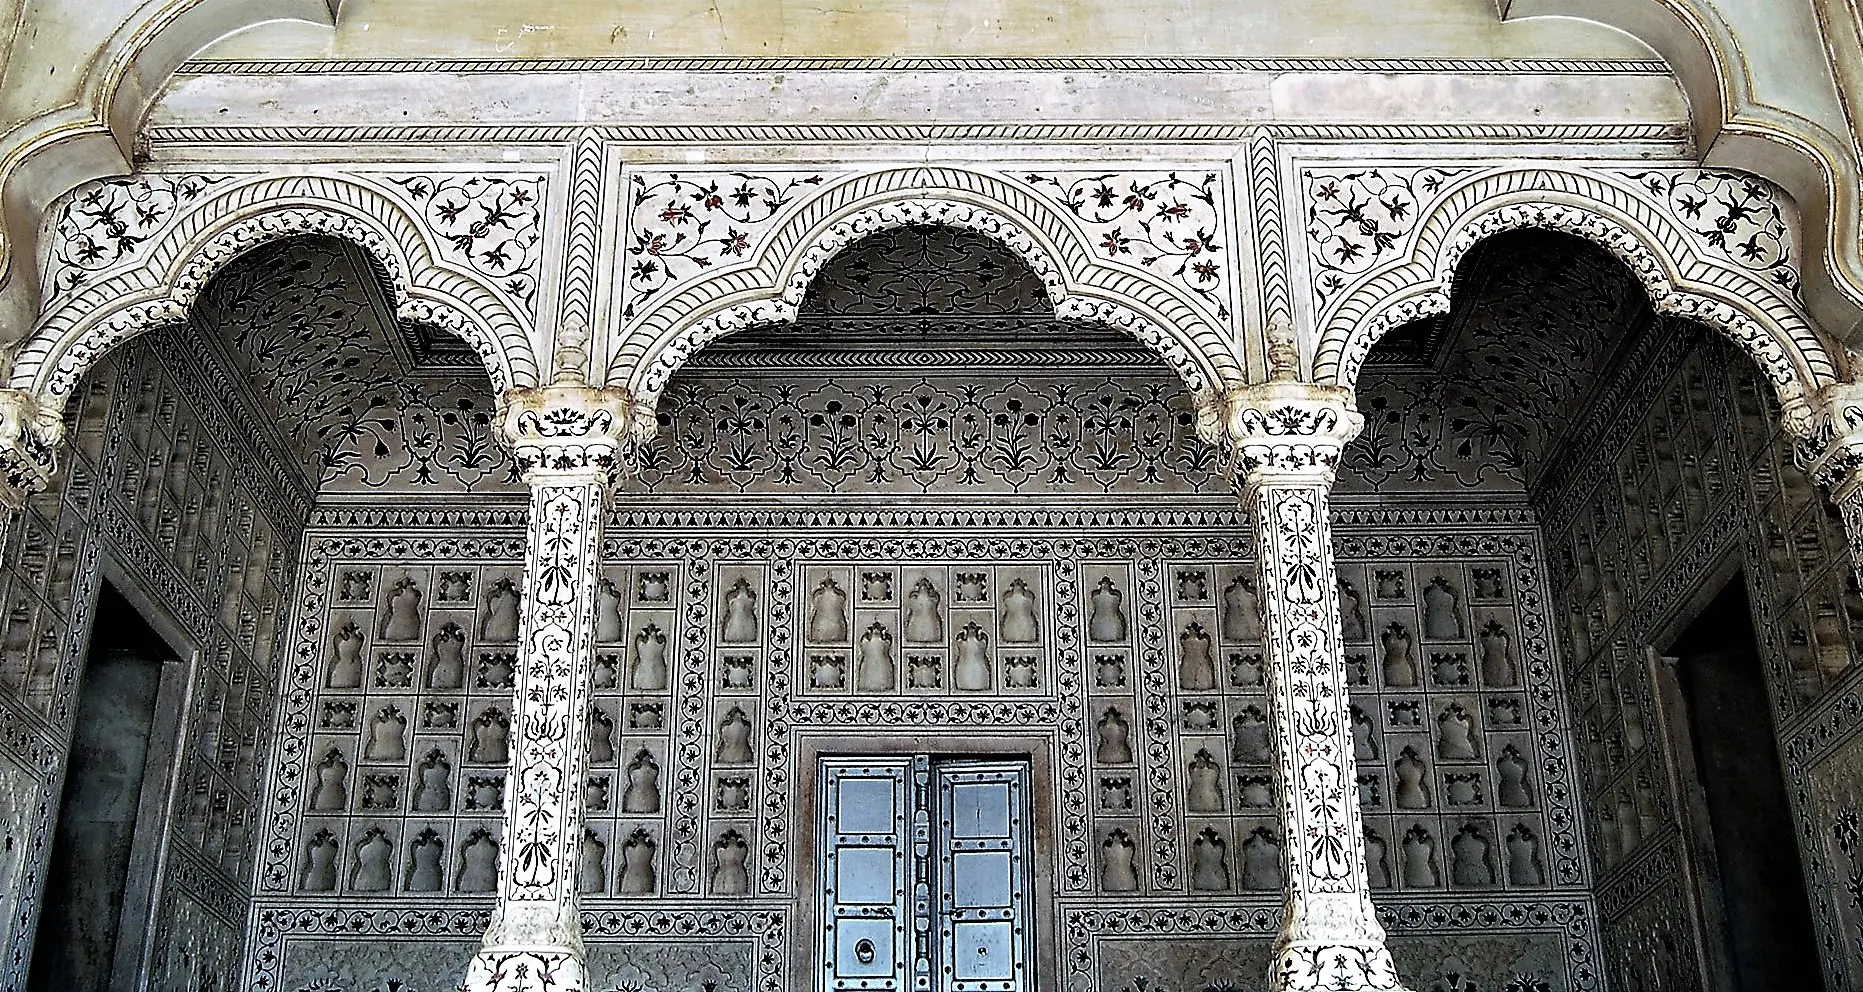 Chamber in Agra Fort